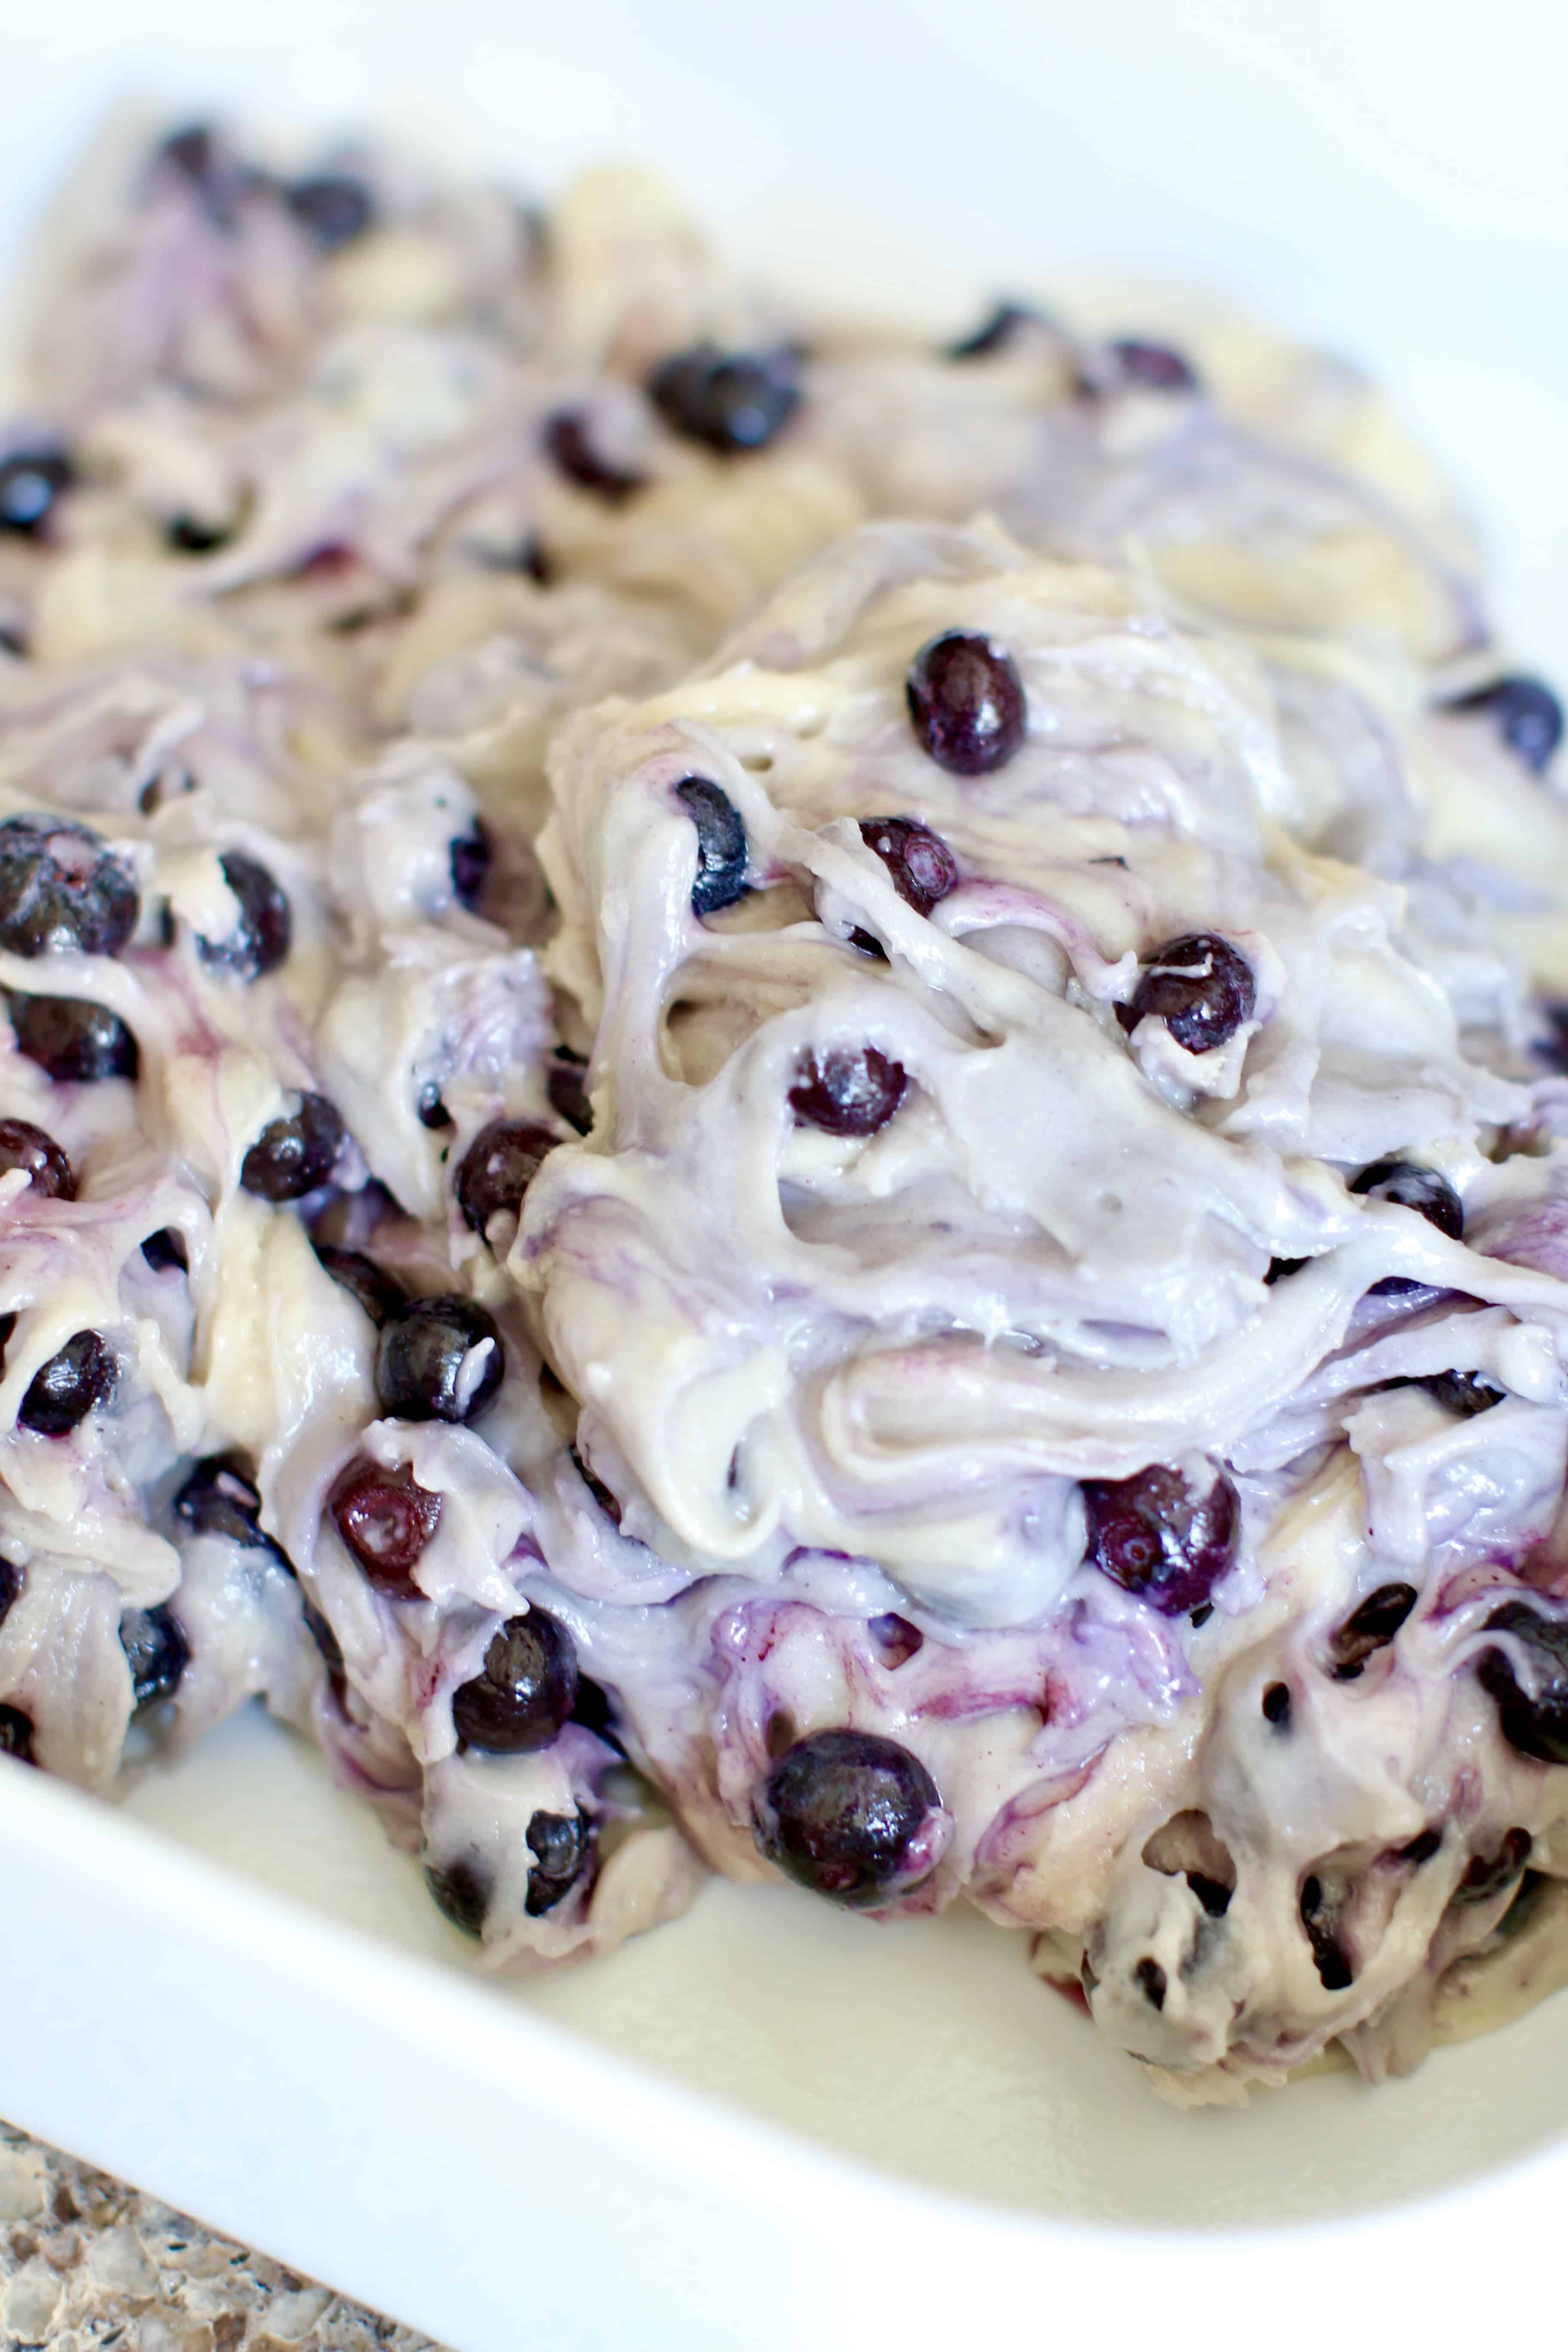 blueberry buckle cake batter spread into a white 9-inch square baking dish.